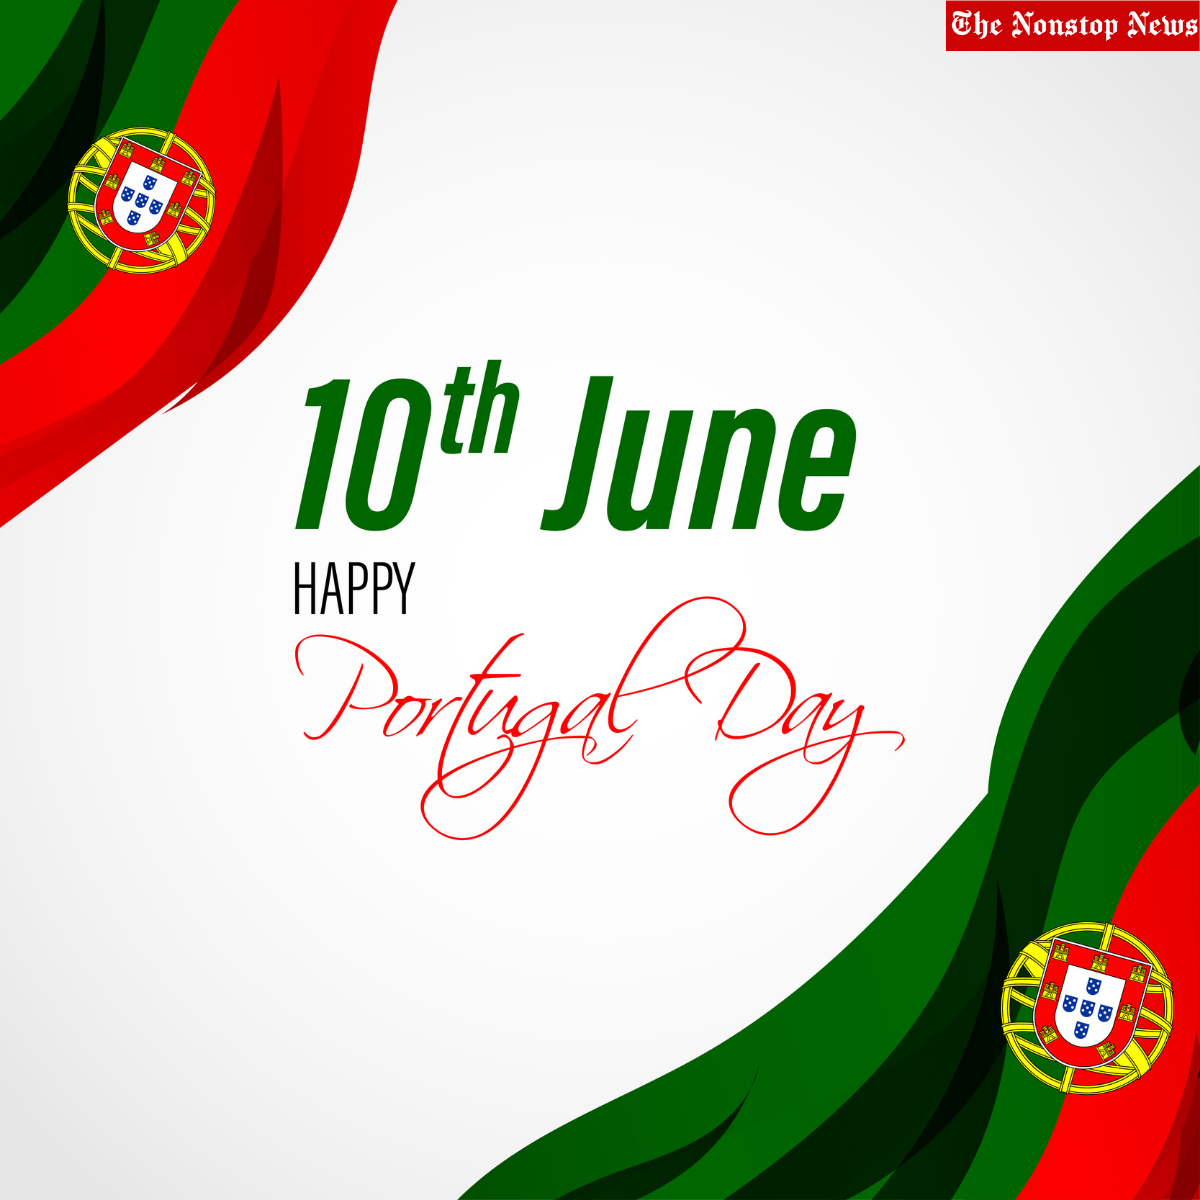 Portugal Day 2022: Quotes, Wishes, Images, Messages, Greetings, Posters to Share